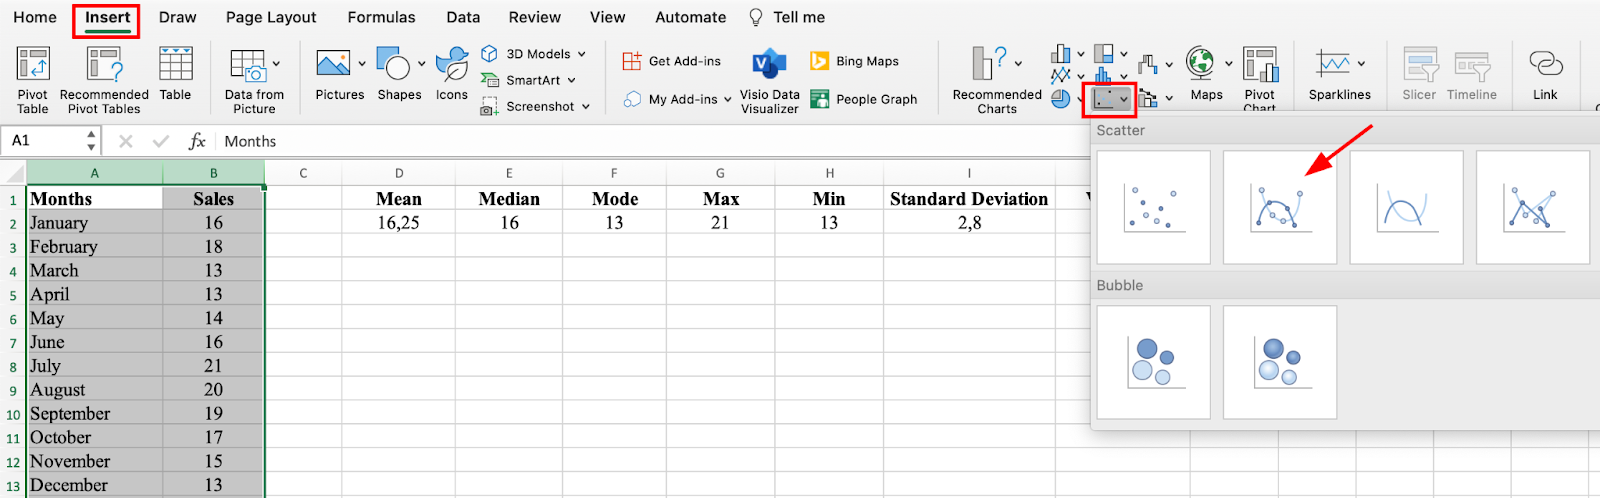 How to scatter plot in Excel. Source: uedufy.com